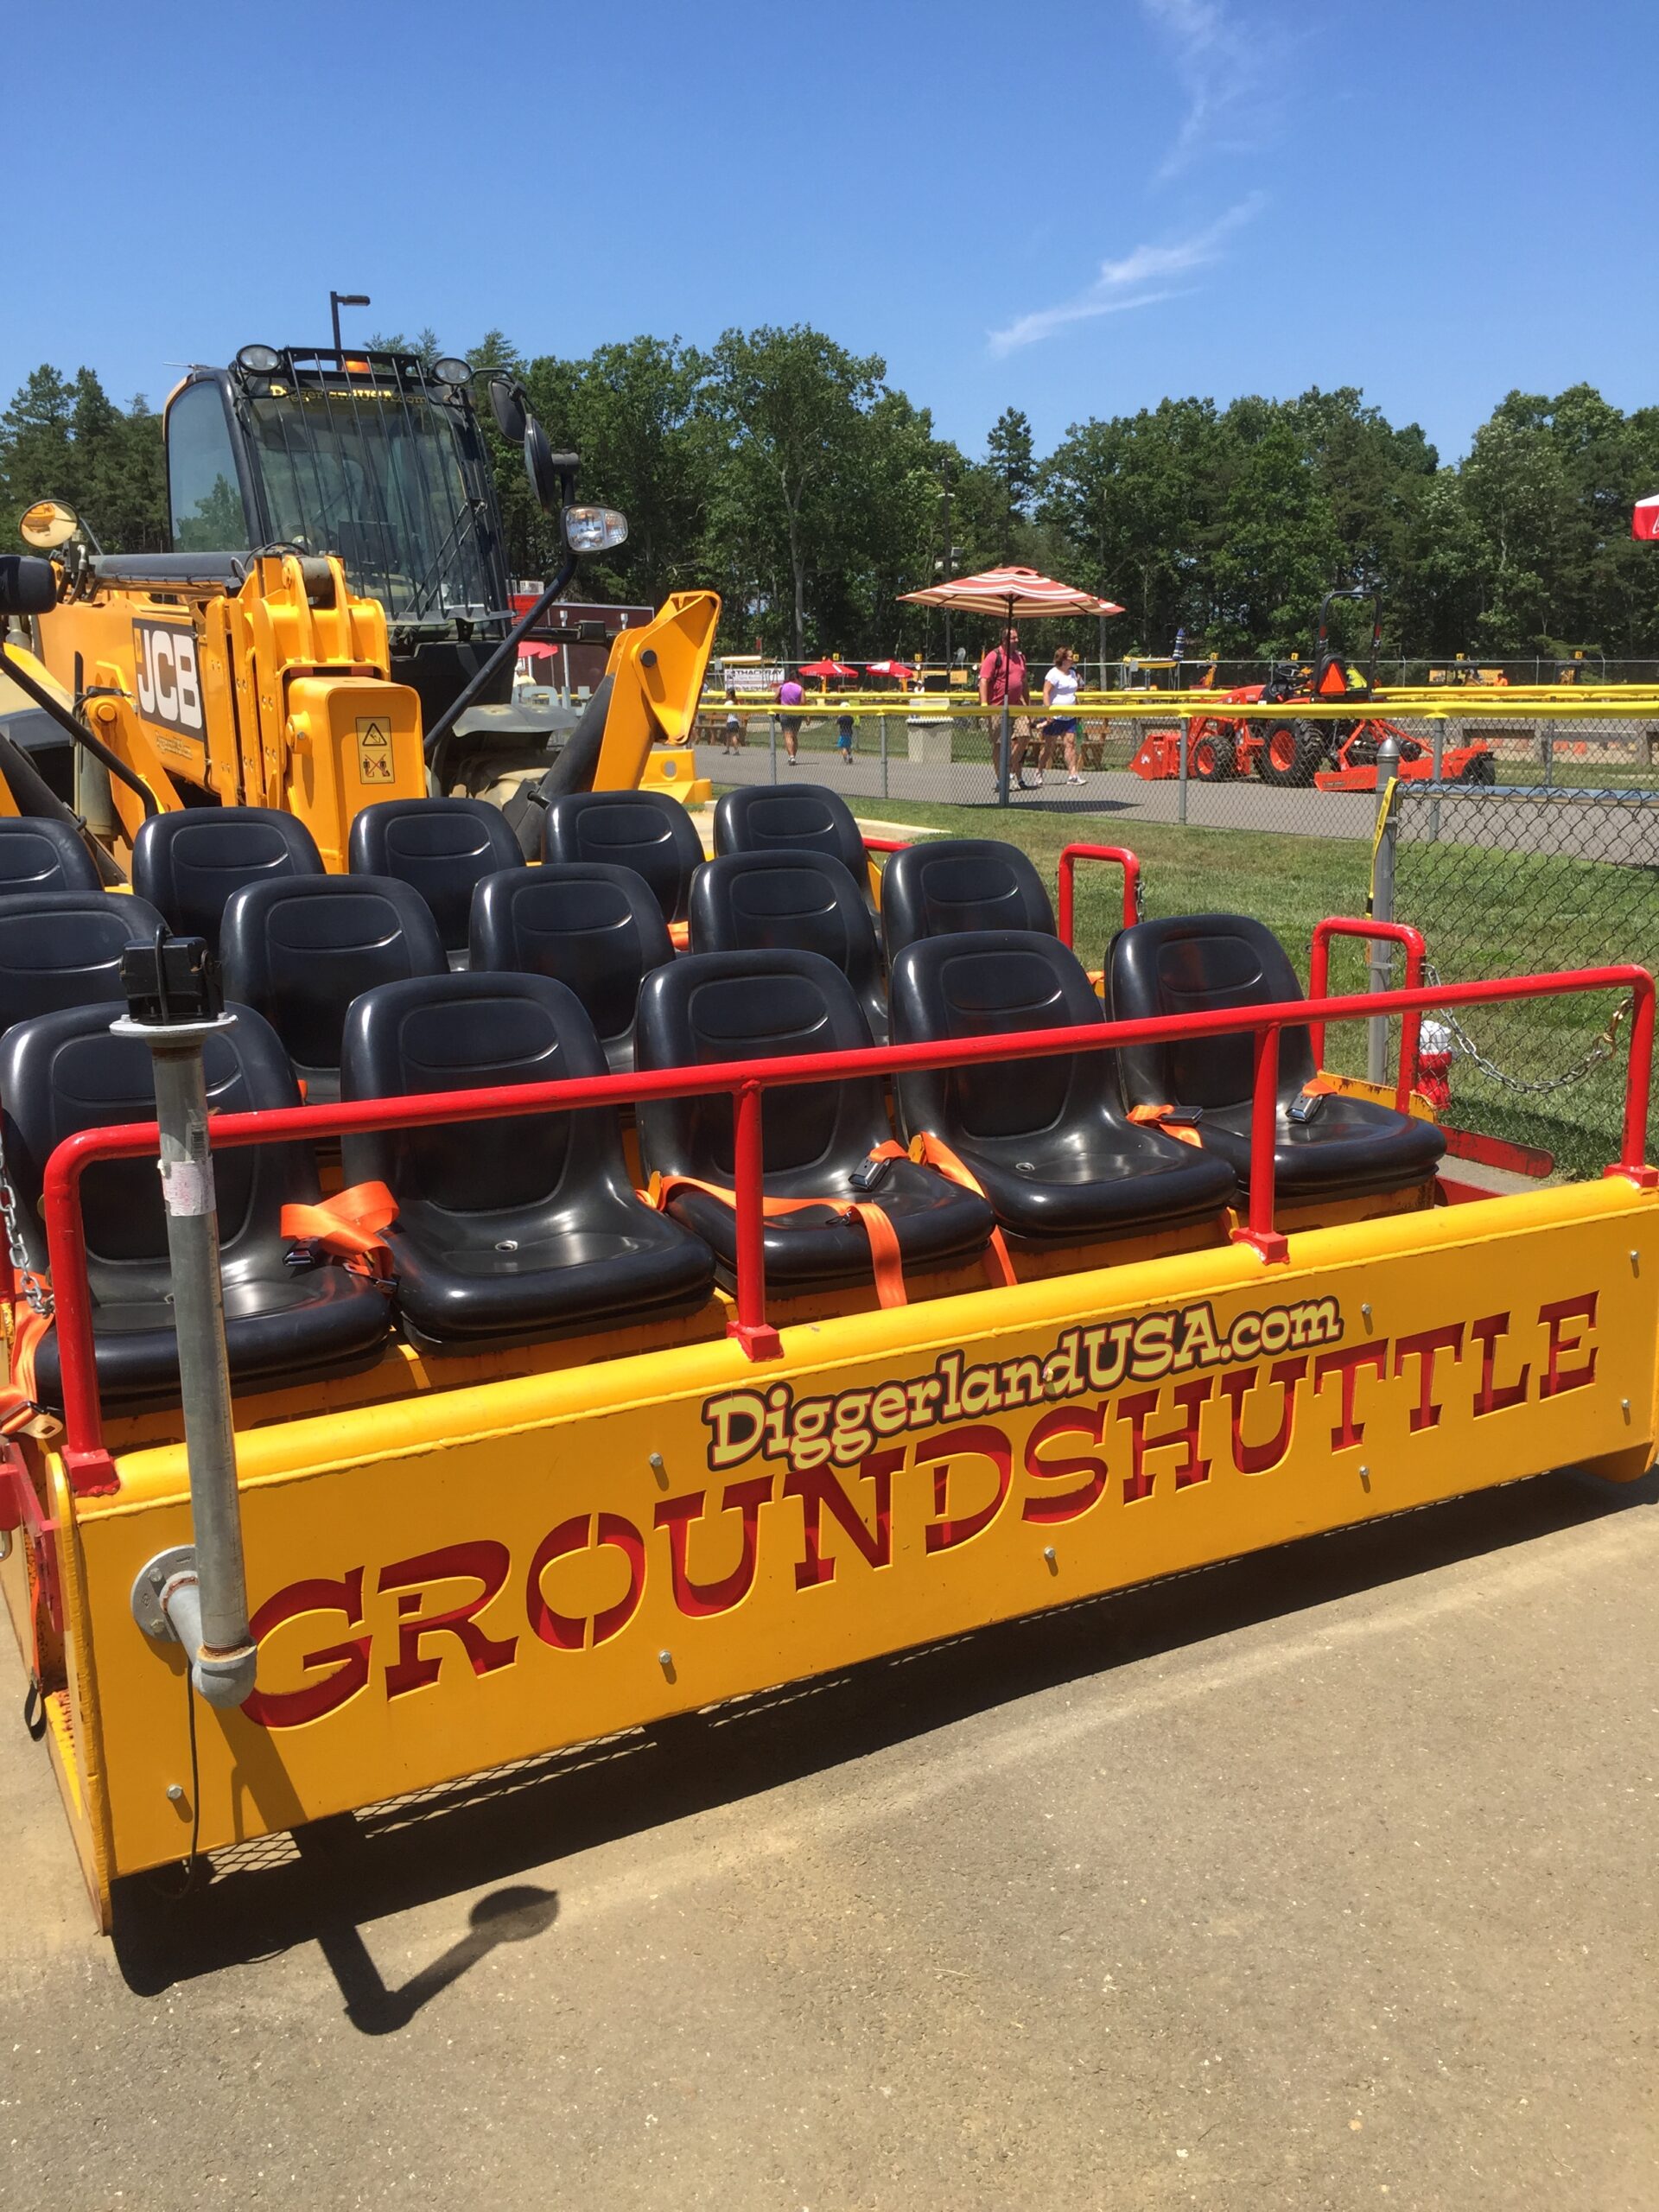 Ground shuttle ride at Diggerland